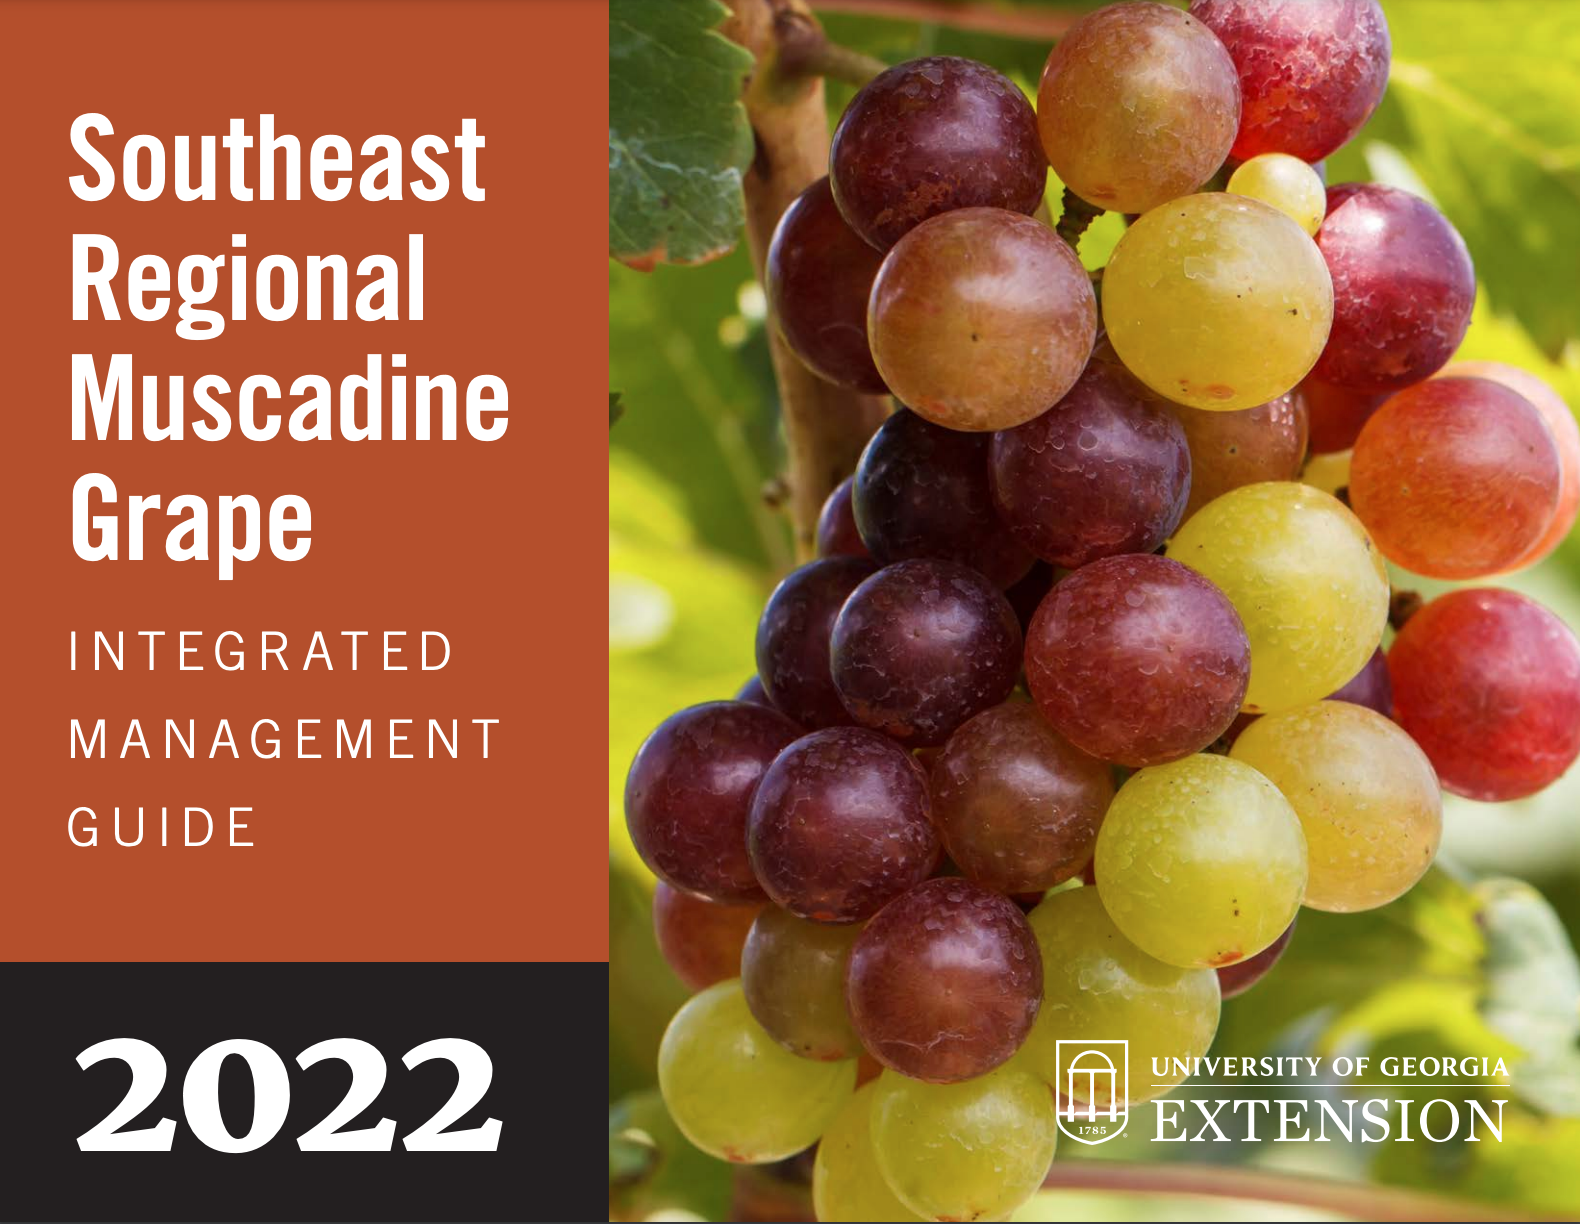 Image of the 202 southeastern regional muscadine grape production guide first page